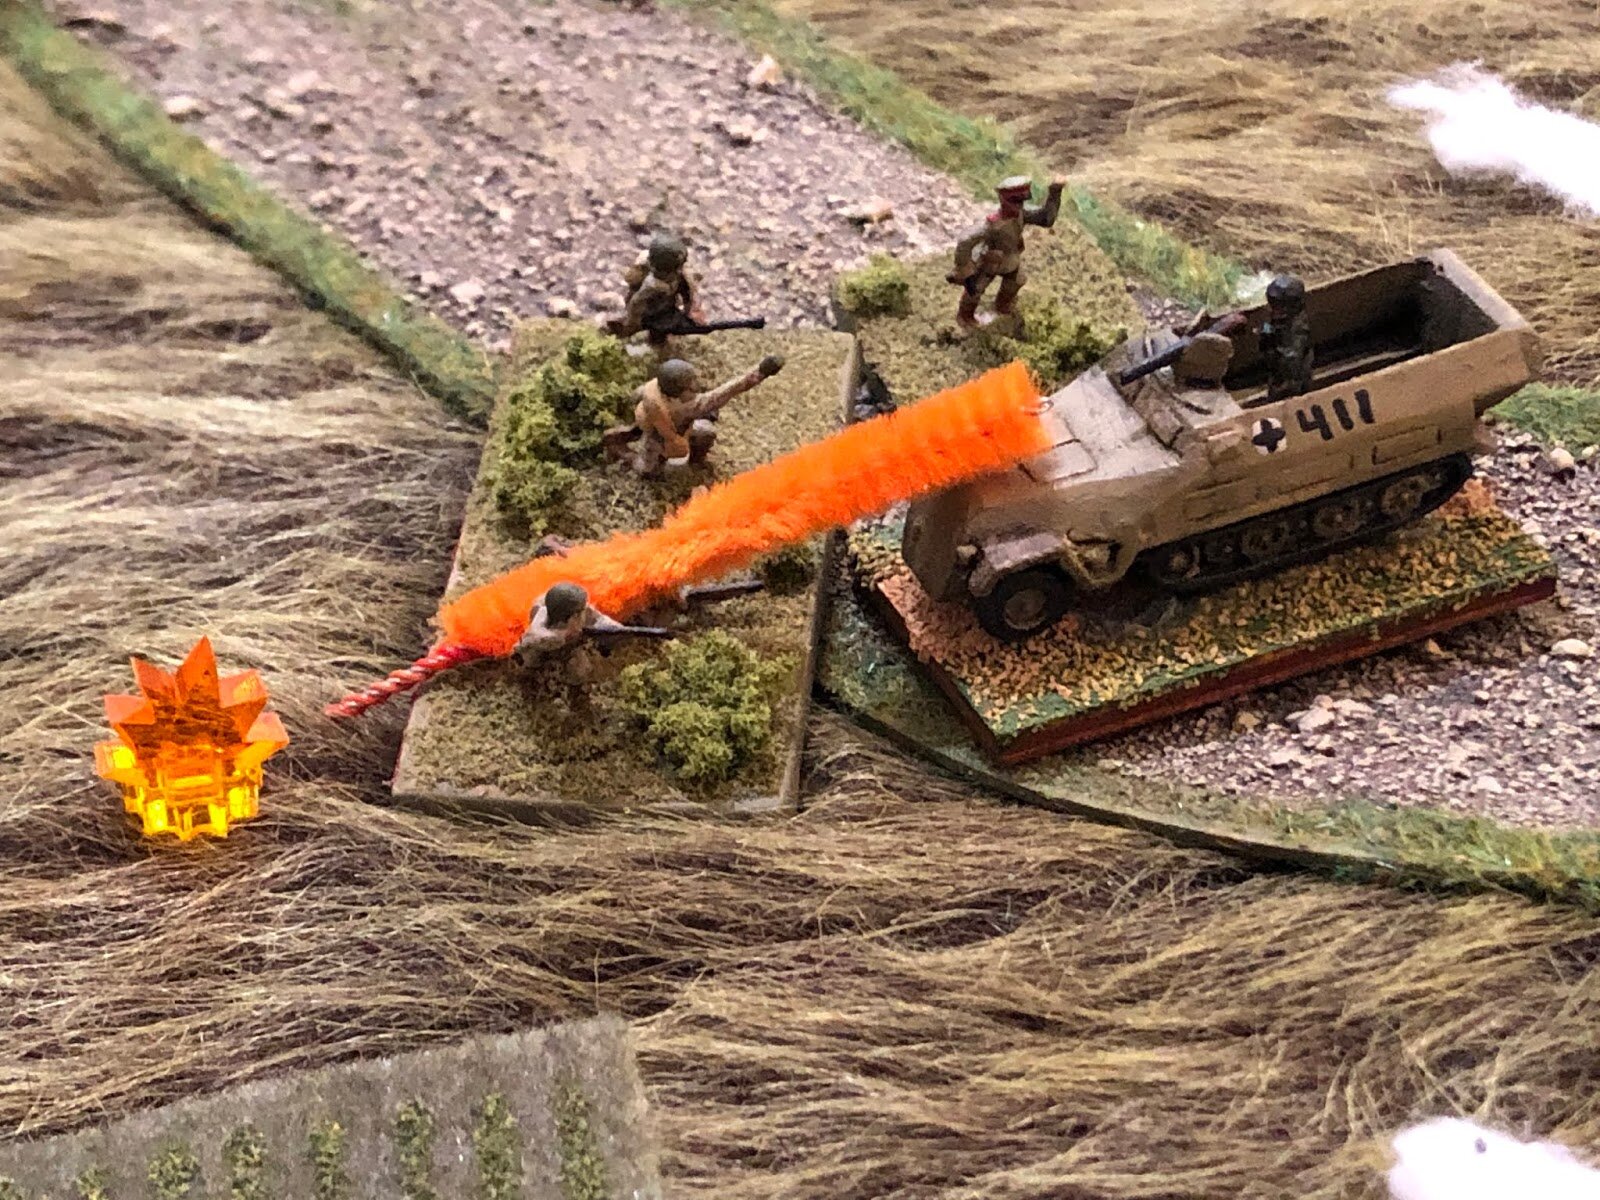  They dodge defensive fire from the German machine gun, clamoring up onto the steel beast, firing at point blank range and tossing hand grenades... 